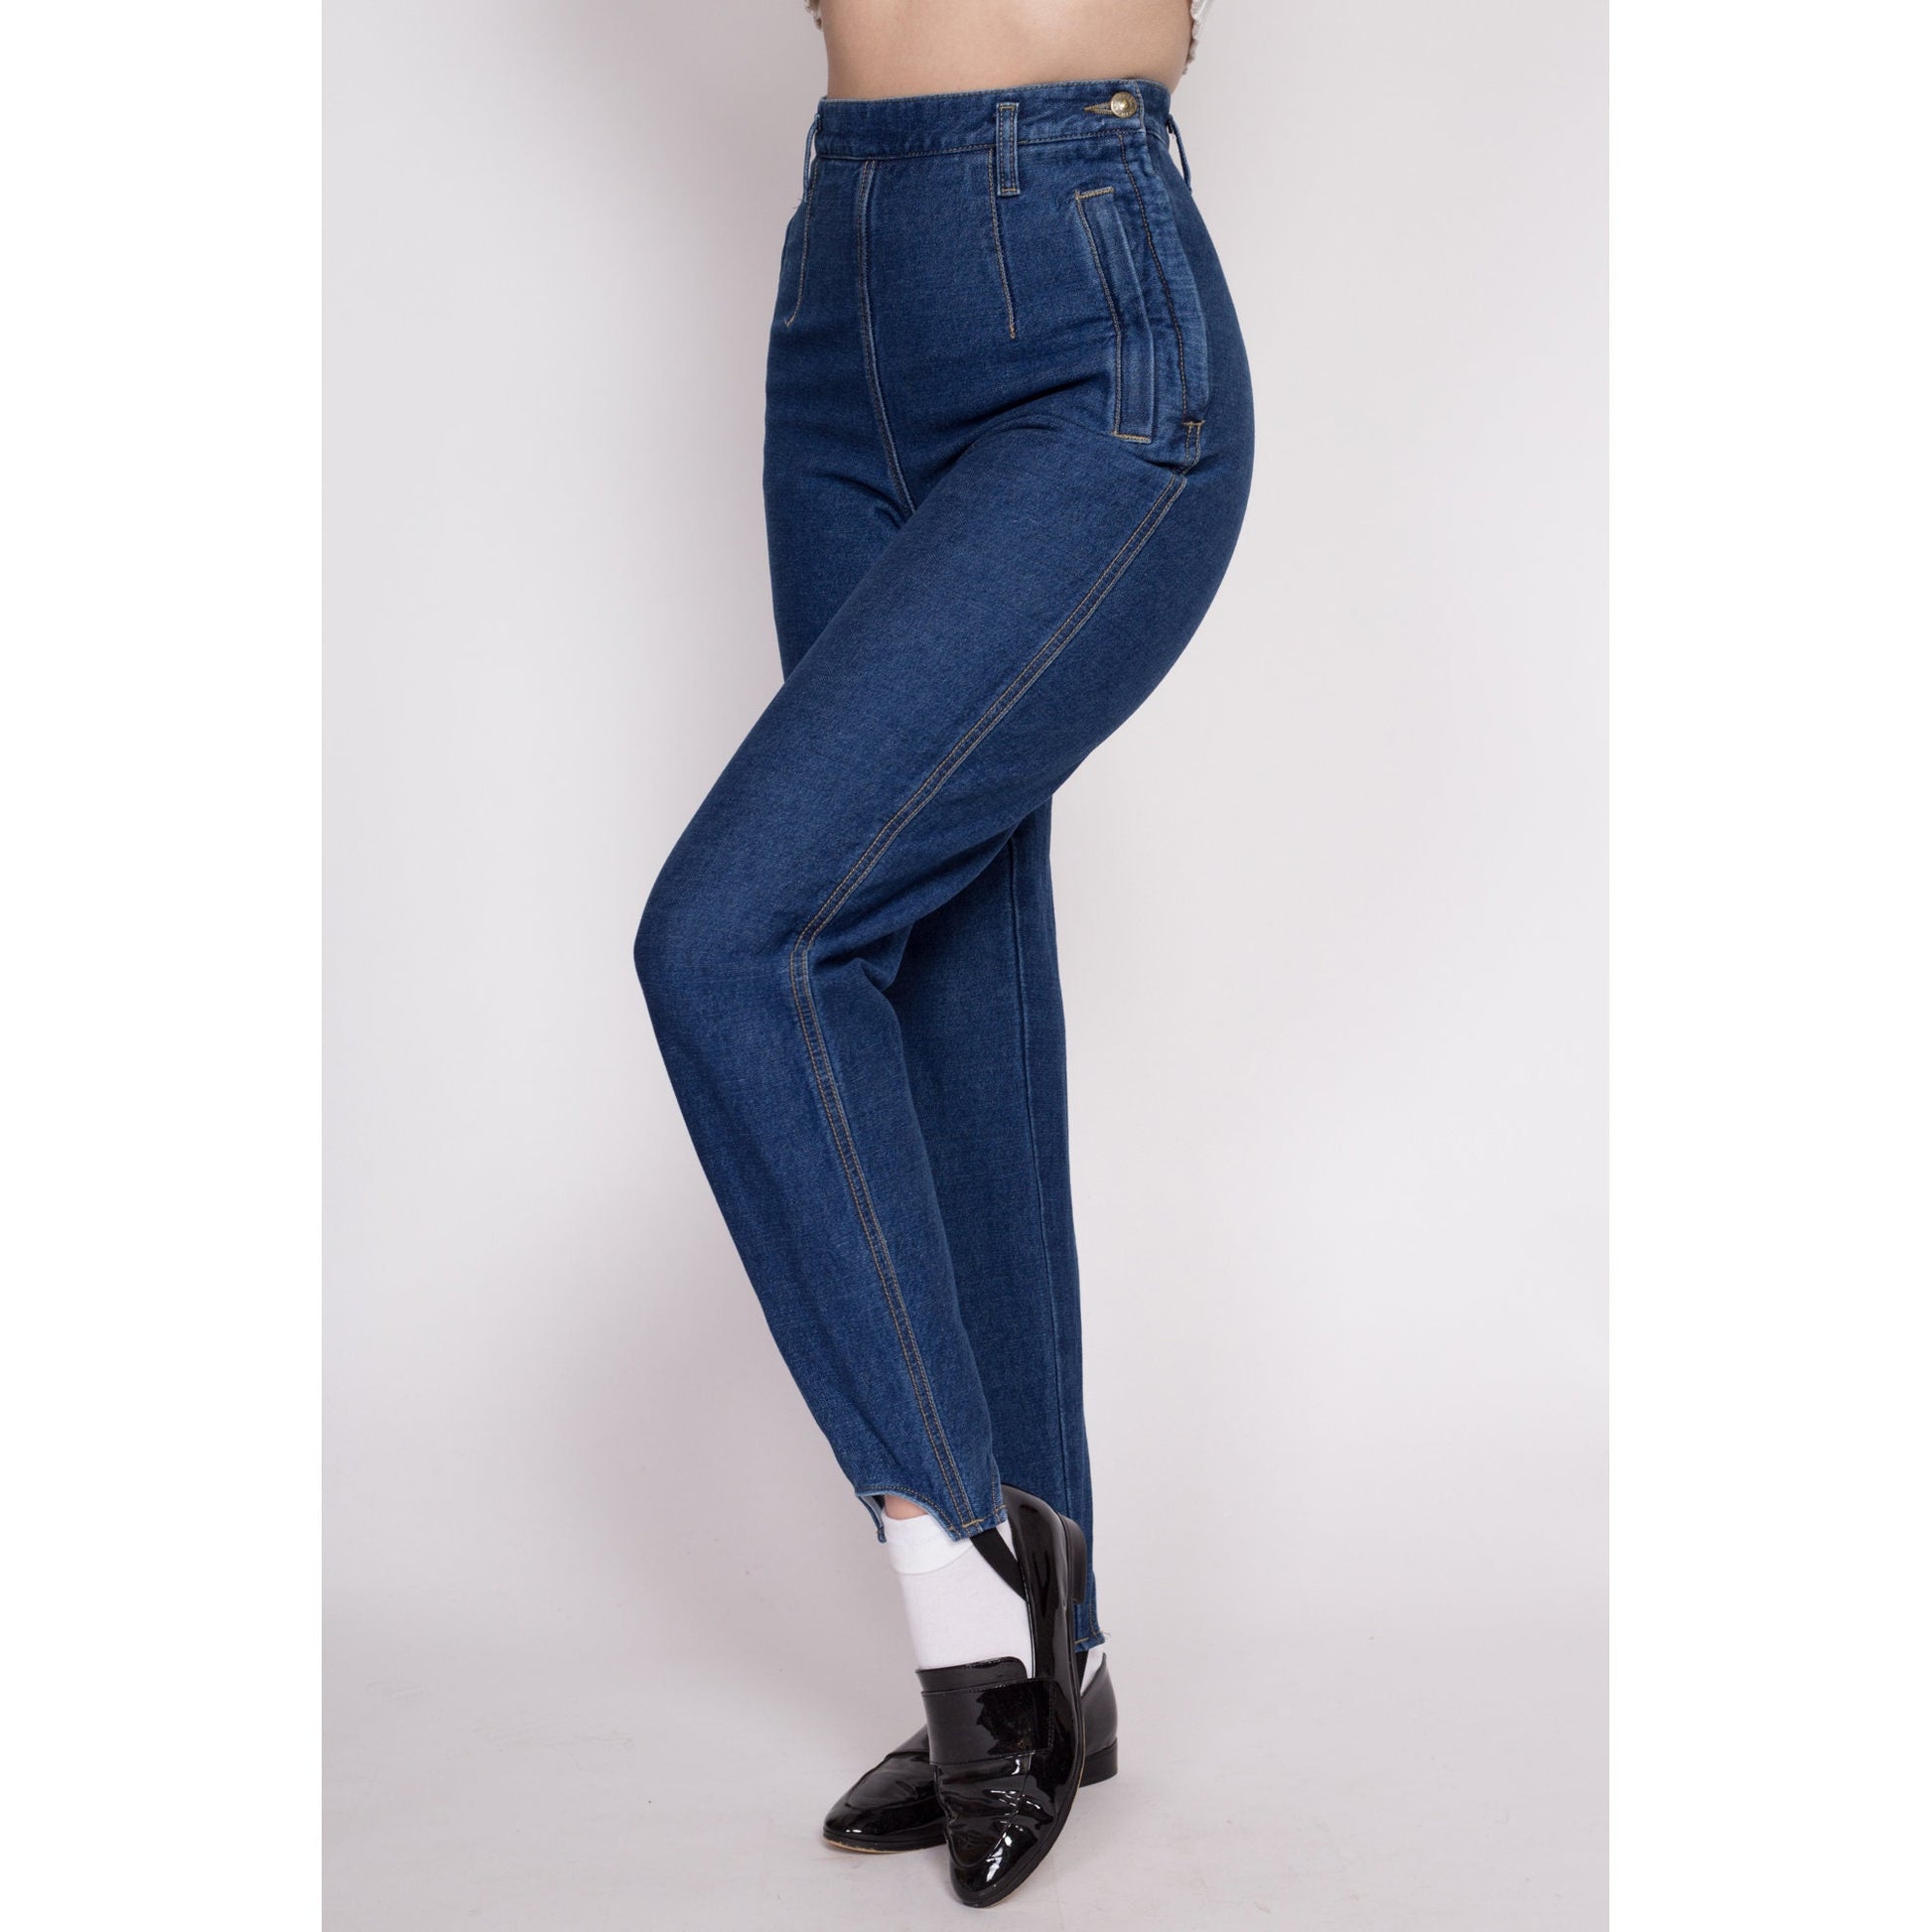 90s Lizwear Stirrup Side Zip Jeans - Extra Small, 25" | Vintage High Waisted Dark Wash Stretchy Slim Ankle Jeans